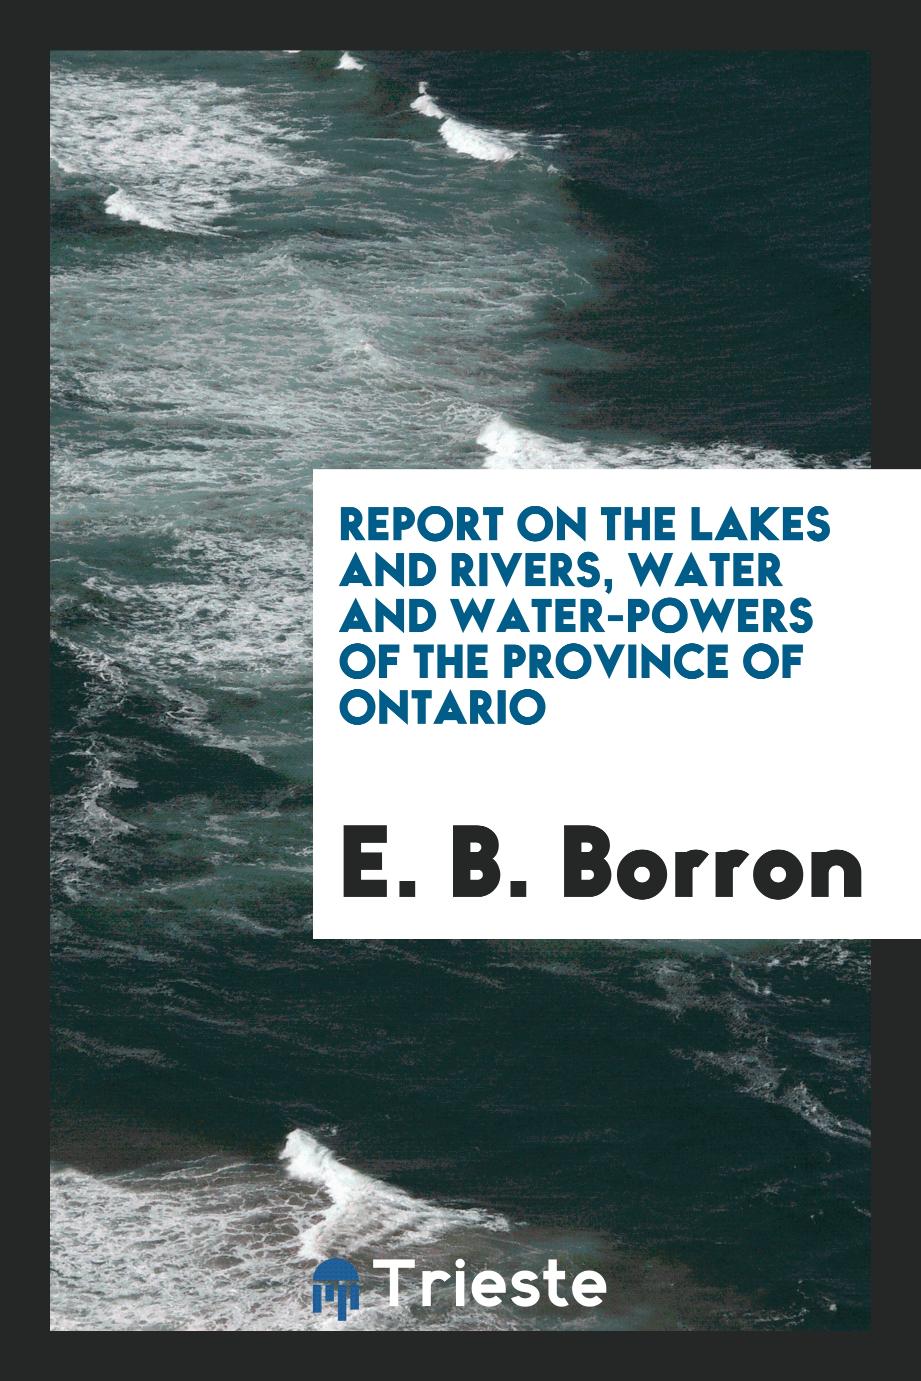 Report on the lakes and rivers, water and water-powers of the province of Ontario